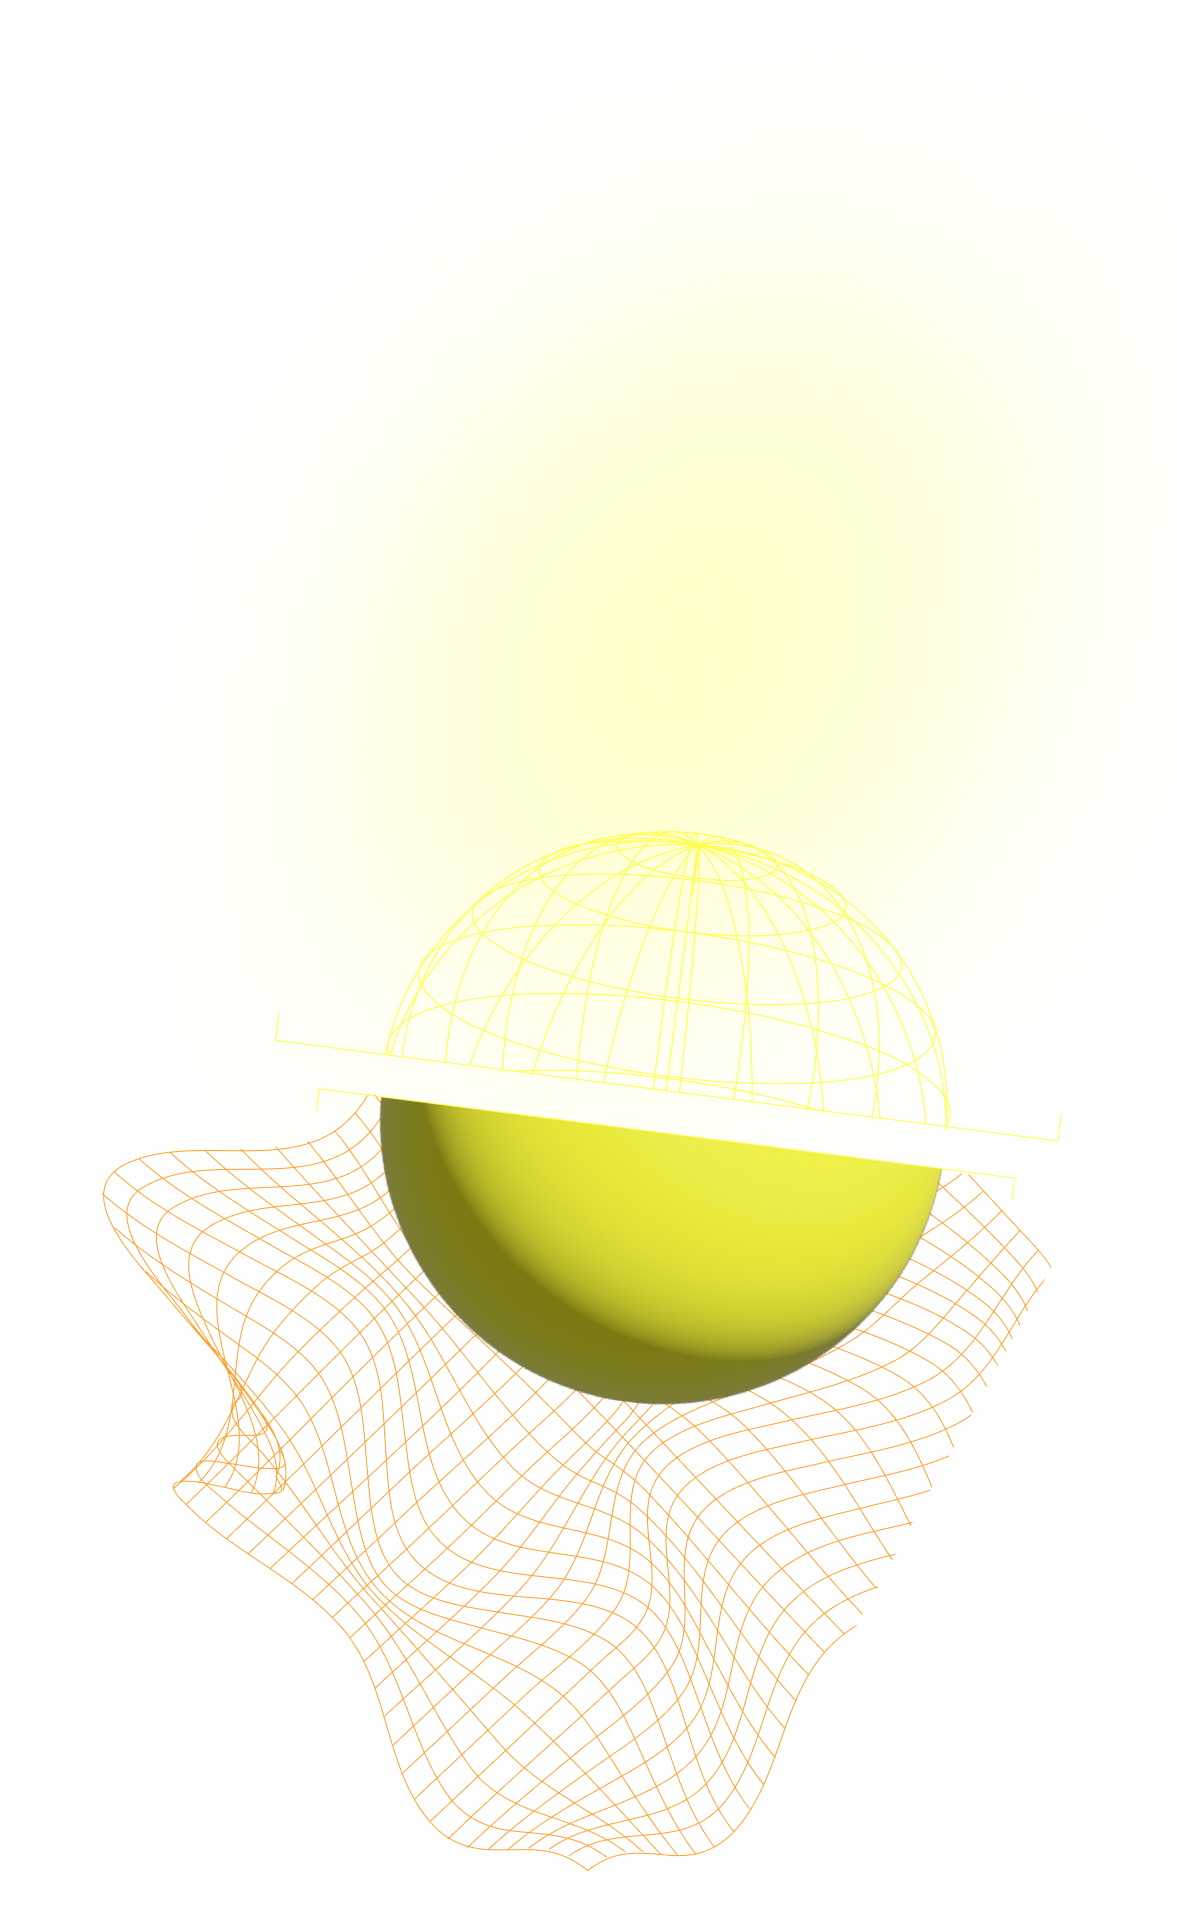 Figures with sphere 3D yellow as detail for background